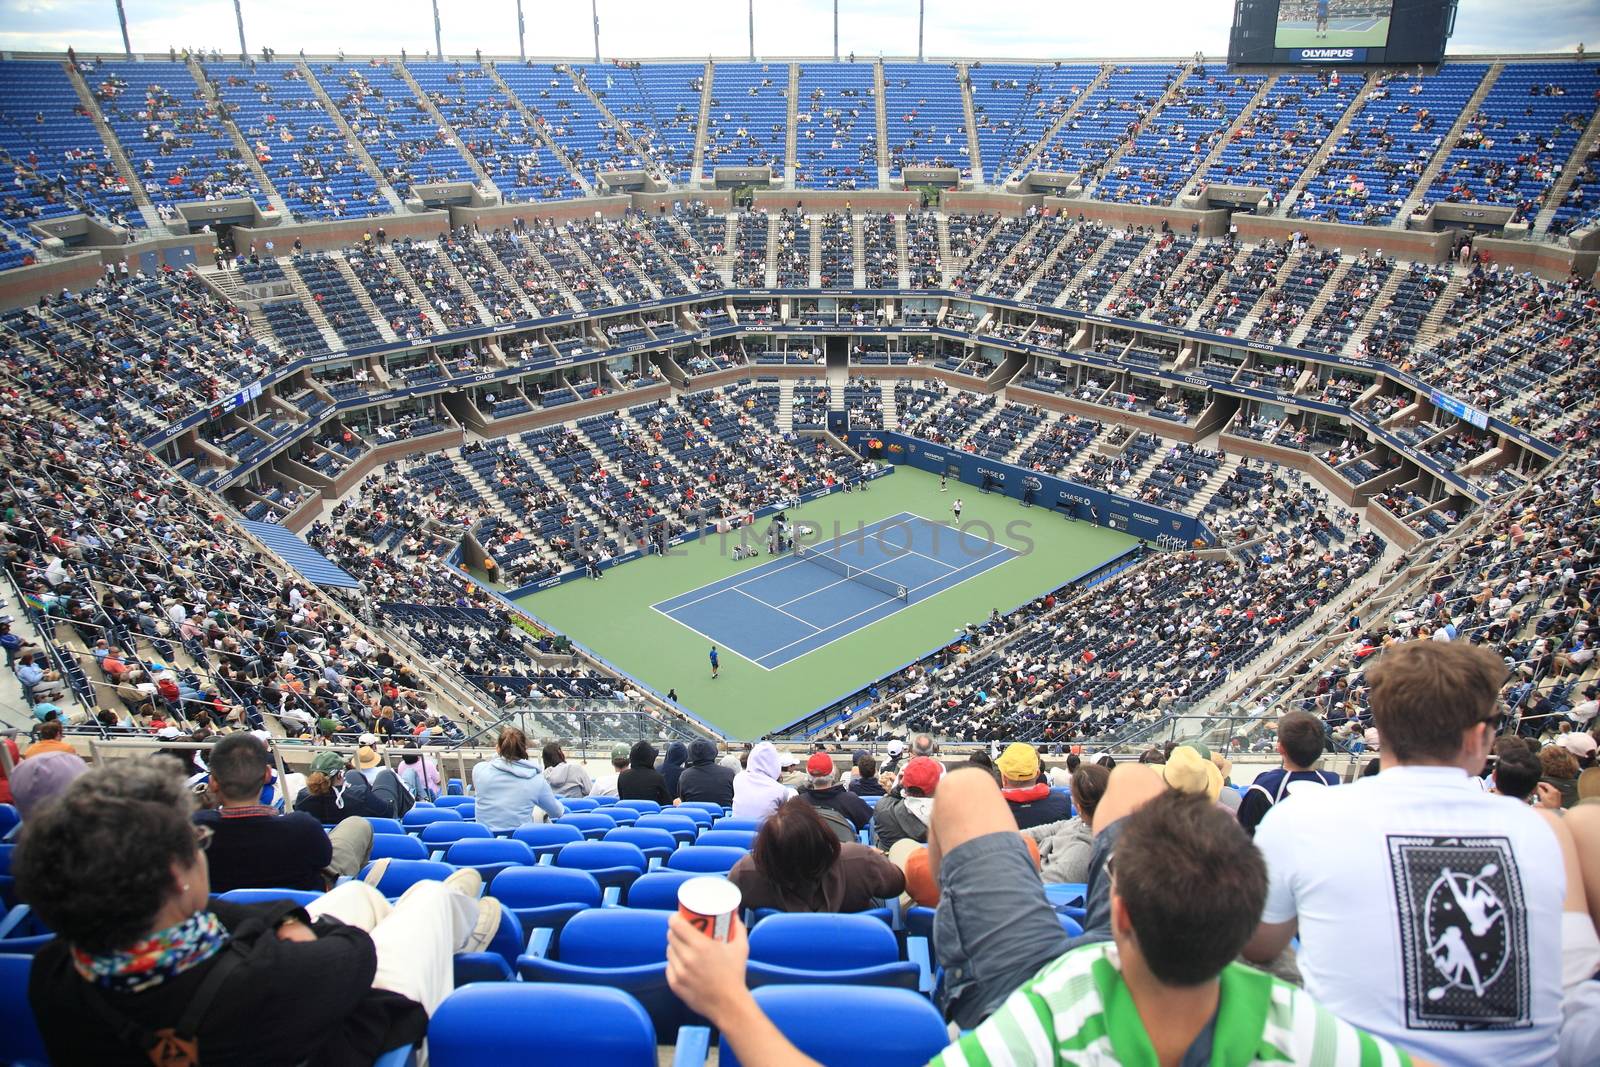 A crowded Arthur Ashe Stadium for a U.S. Open tennis match in Queens, New York City